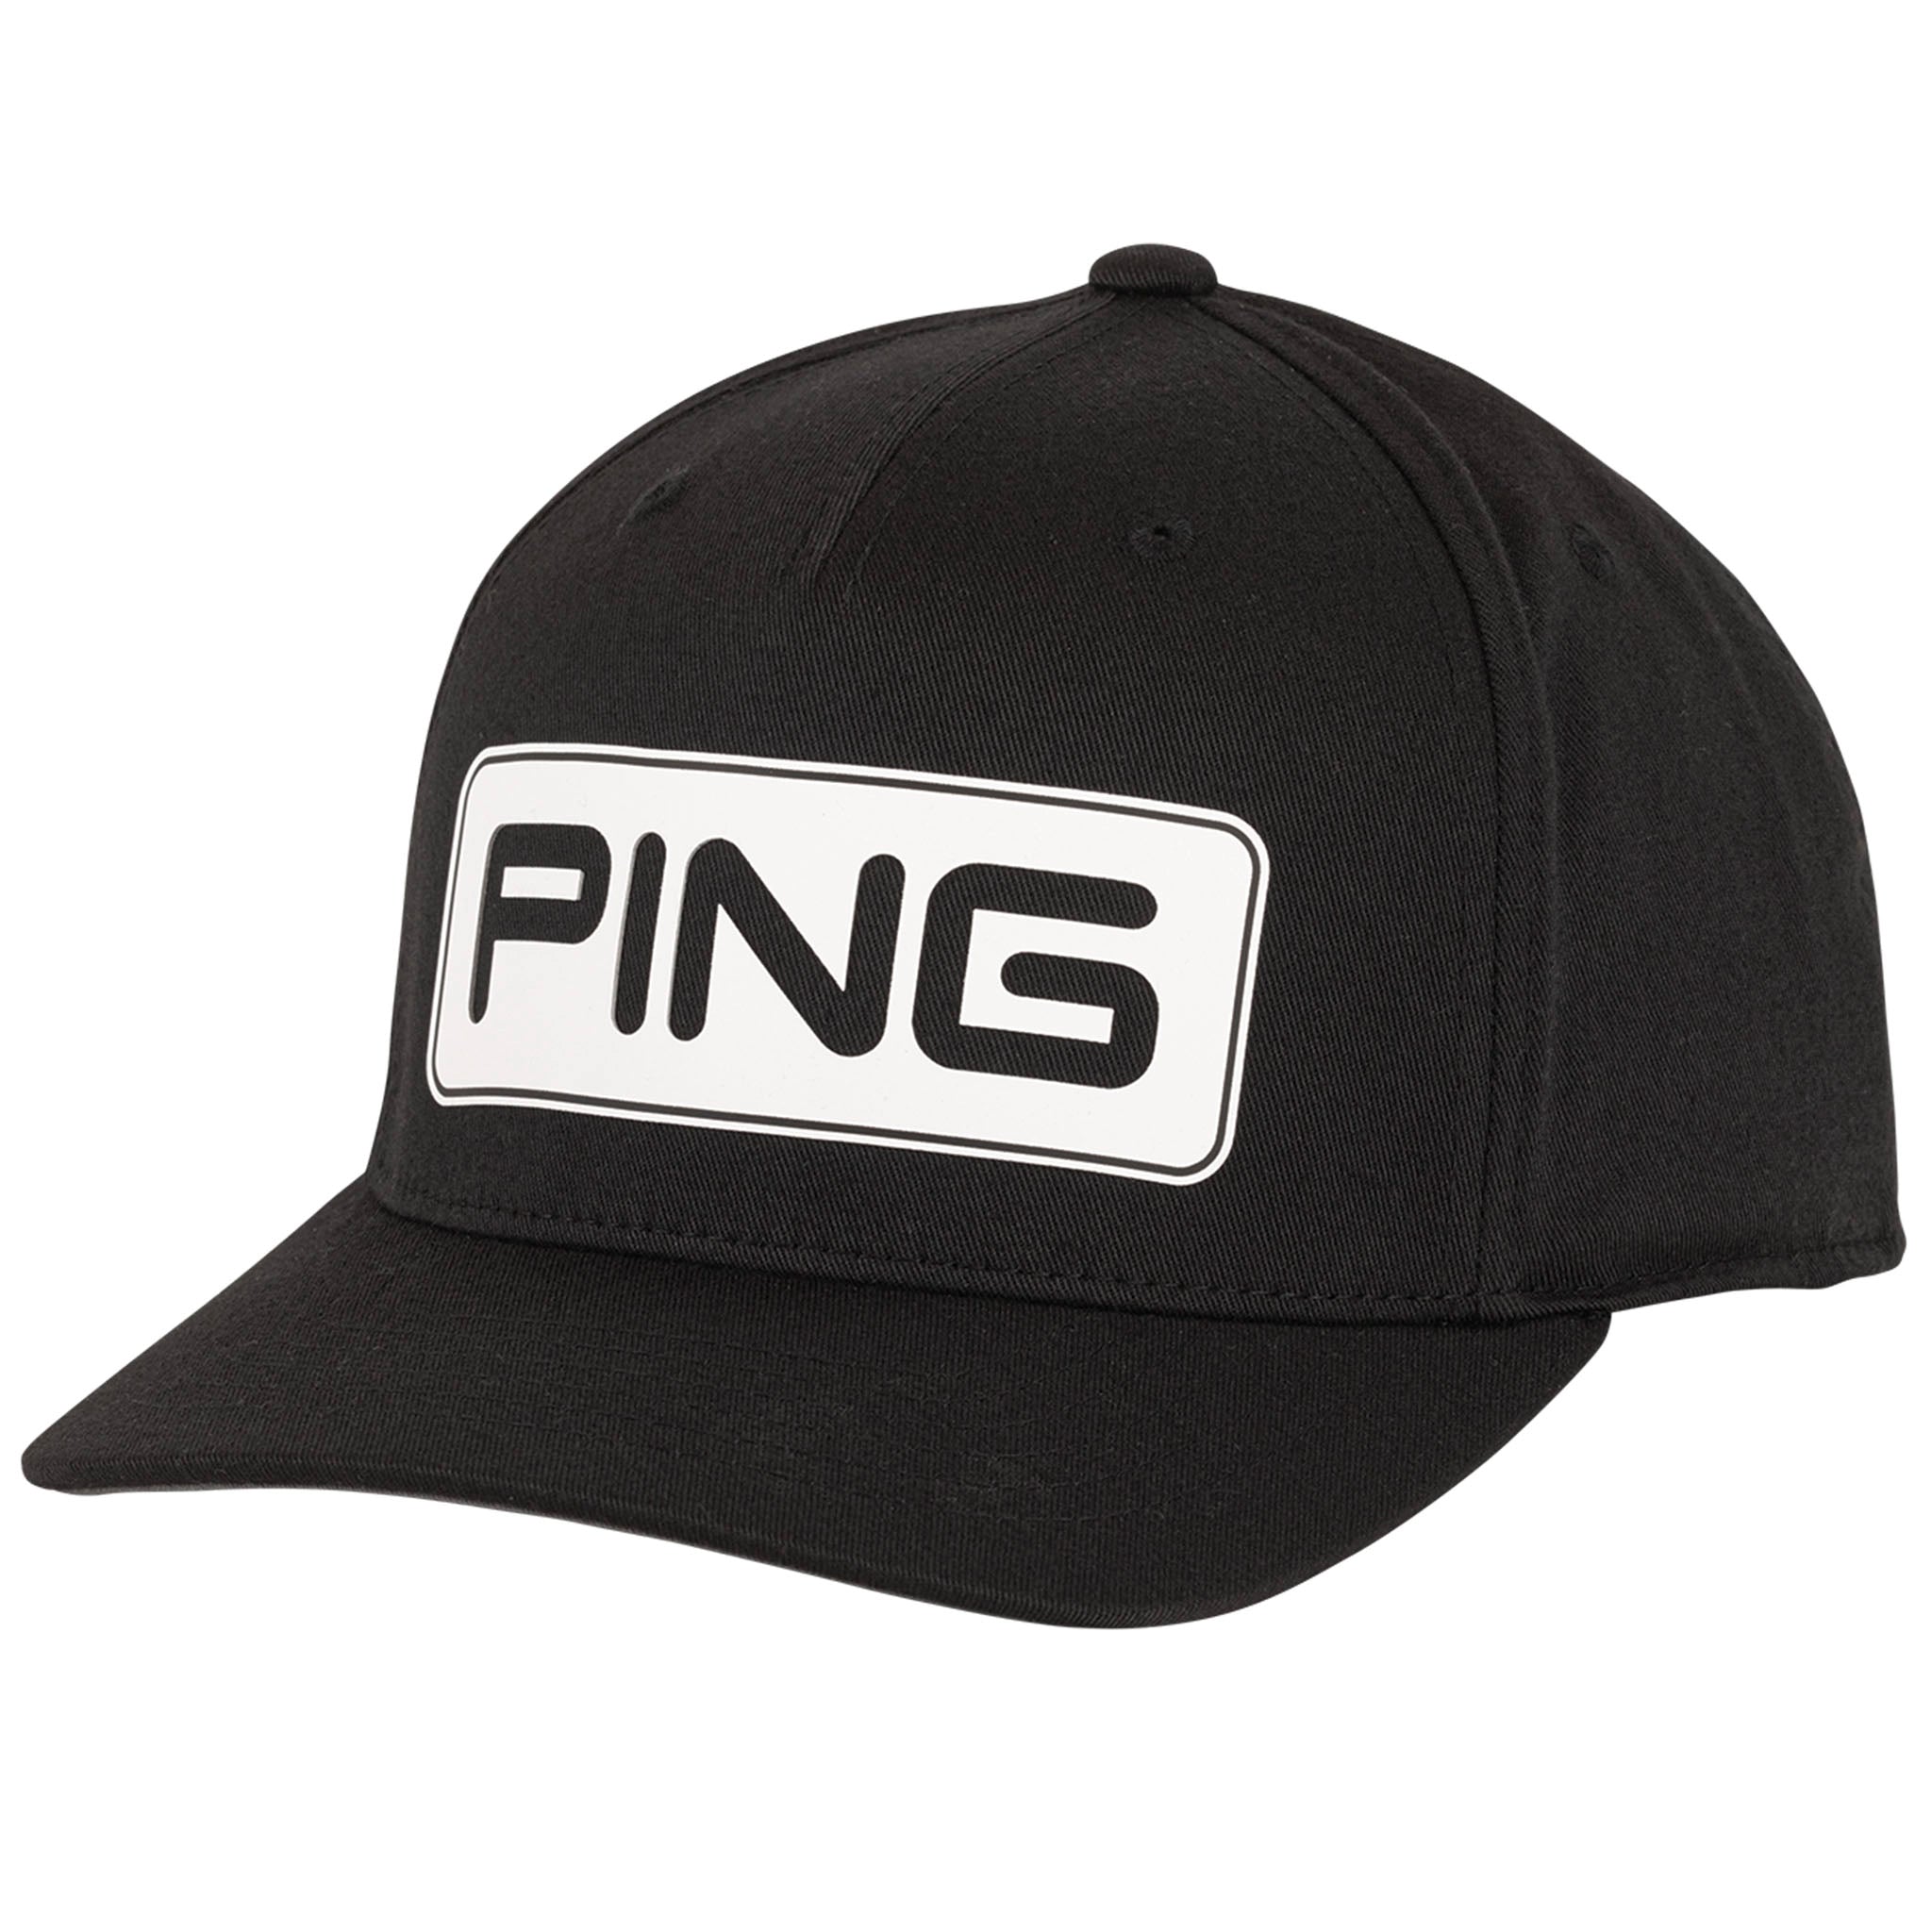 of — Golf Golf Mens The House Caps